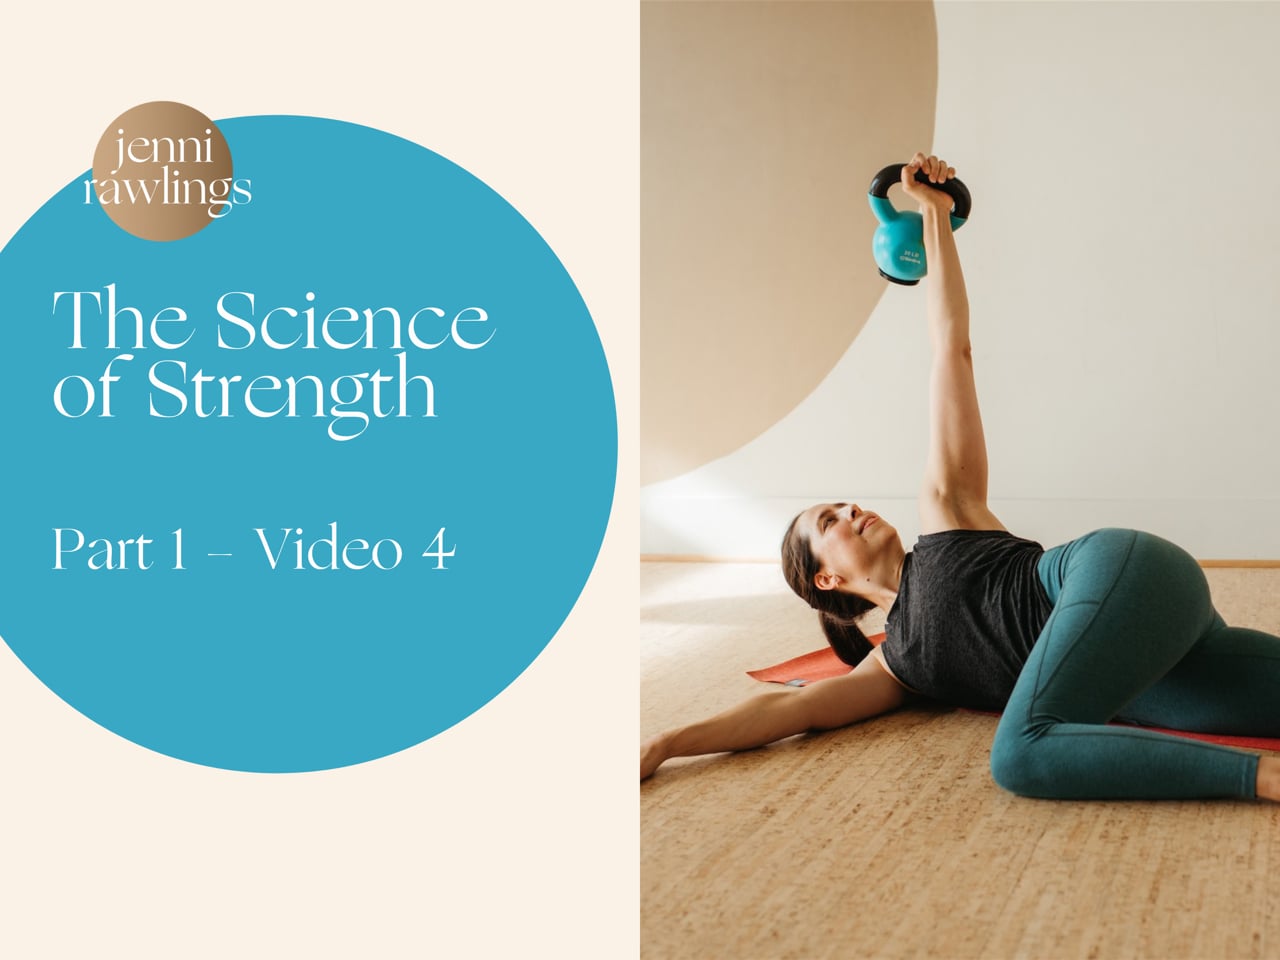 The Science of Strength Part 1, Video 4